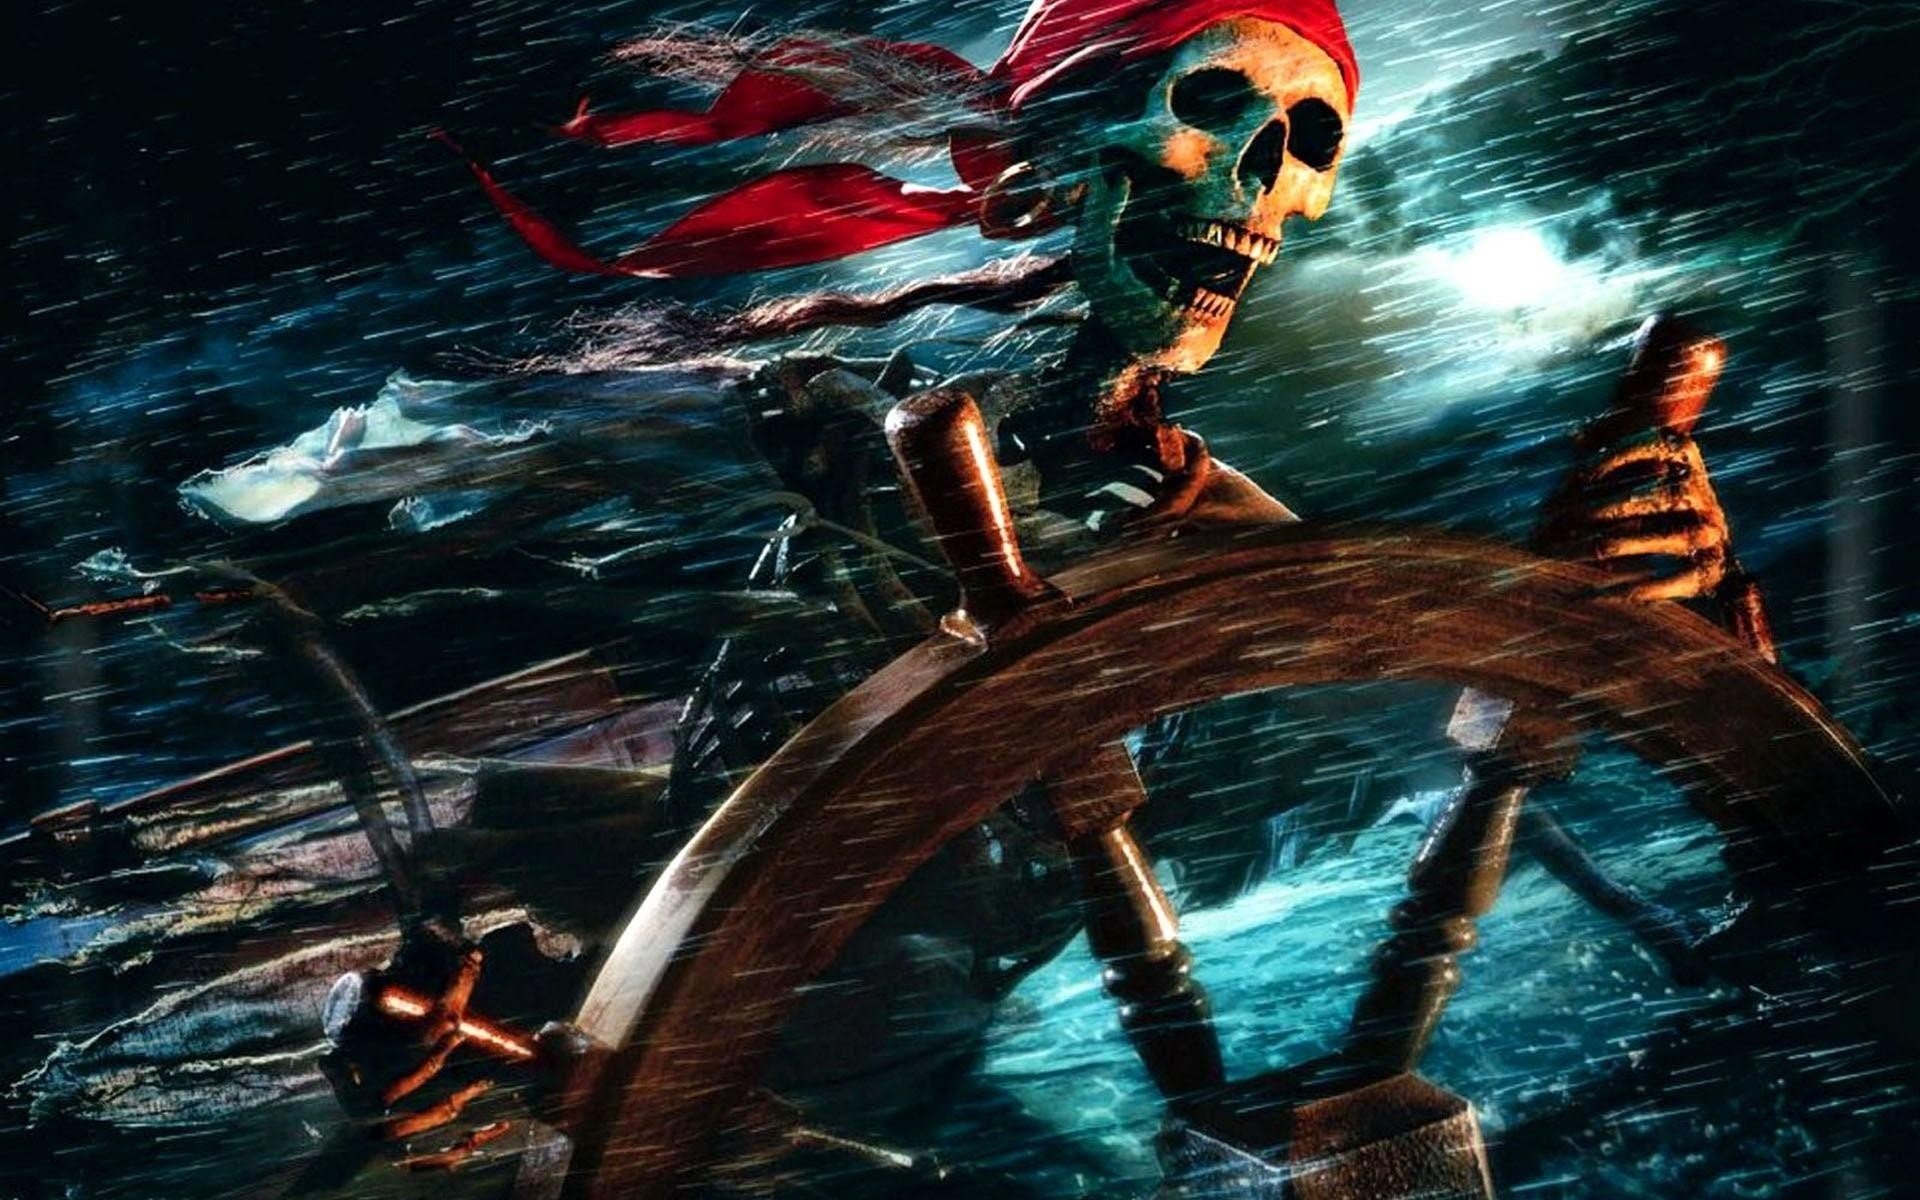 pirates of the caribbean ride wallpaper